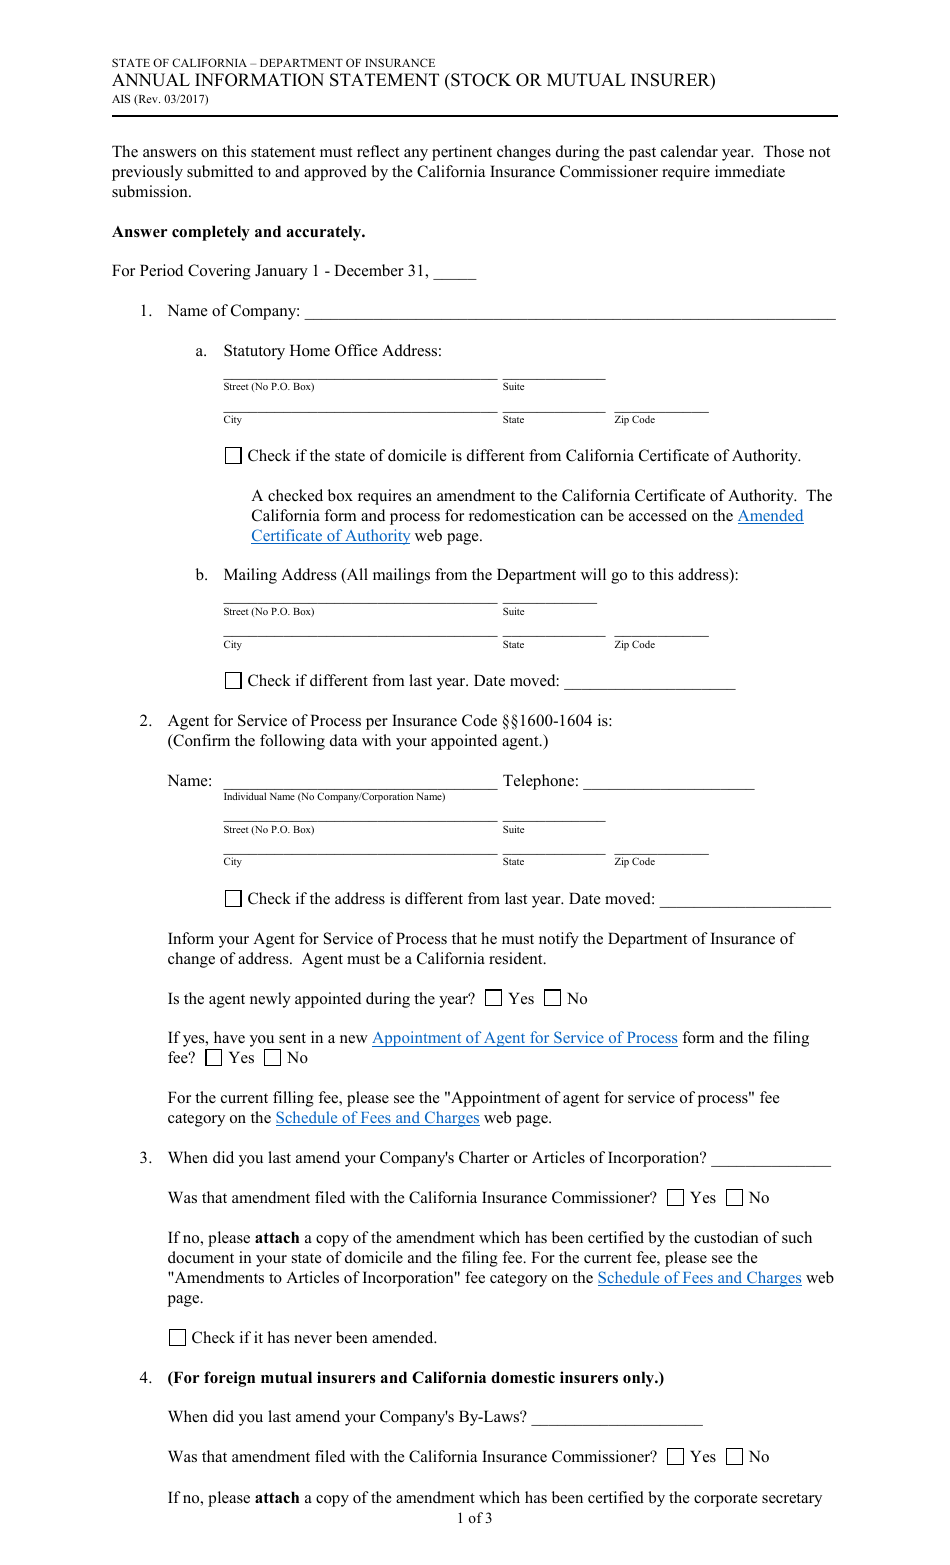 Form AIS Annual Information Statement (Stock or Mutual Insurer) - California, Page 1